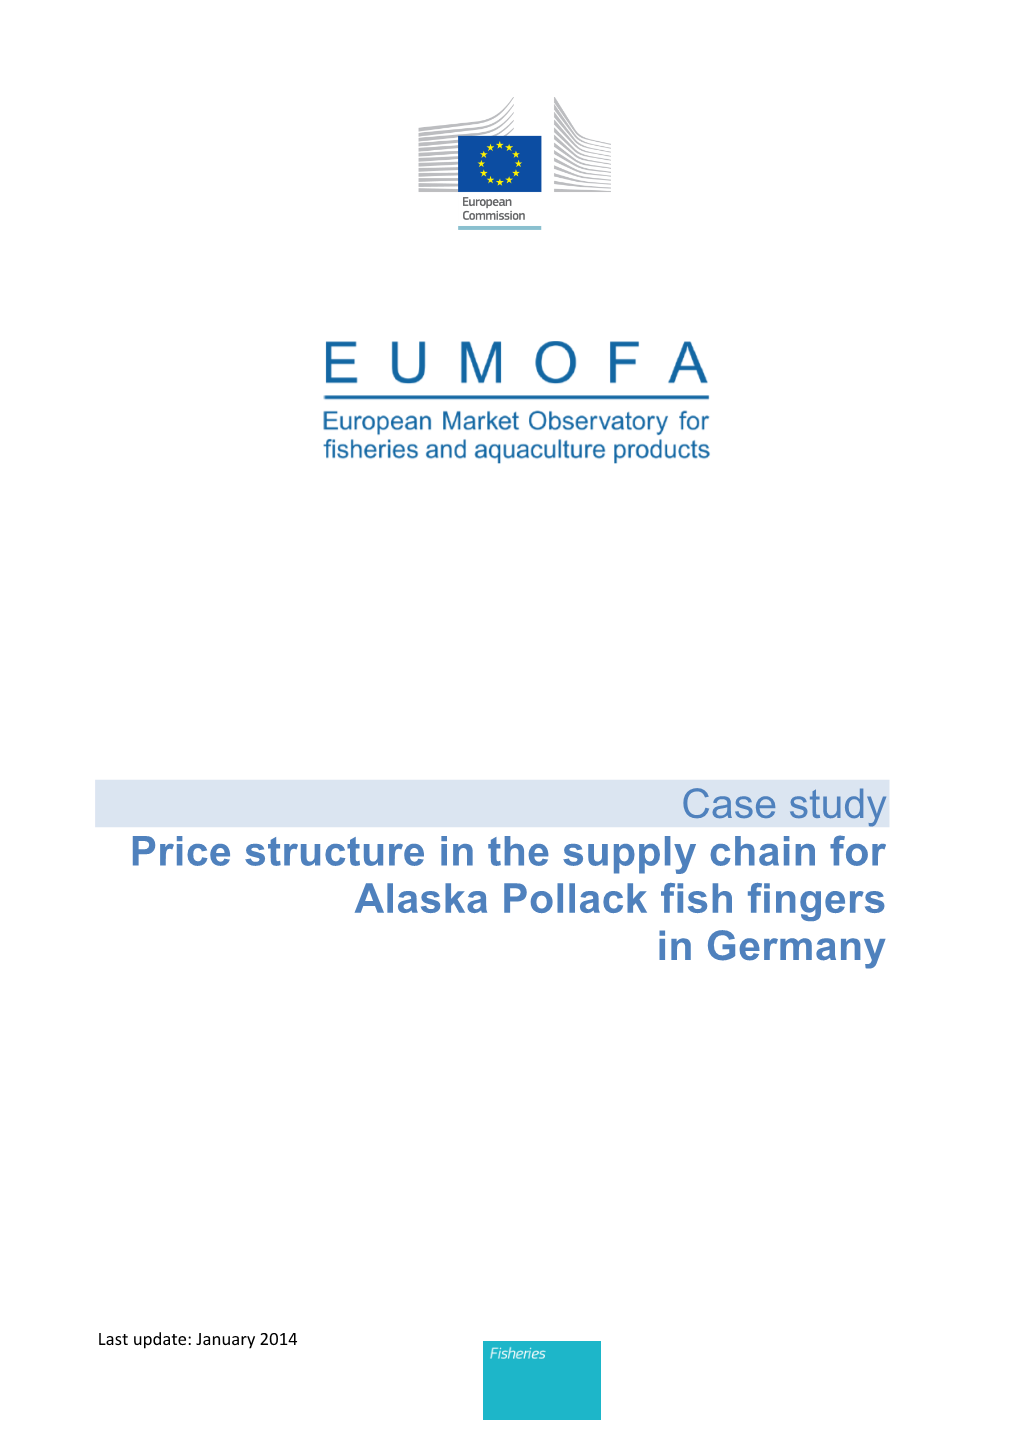 Case Study Price Structure in the Supply Chain for Alaska Pollack Fish Fingers in Germany